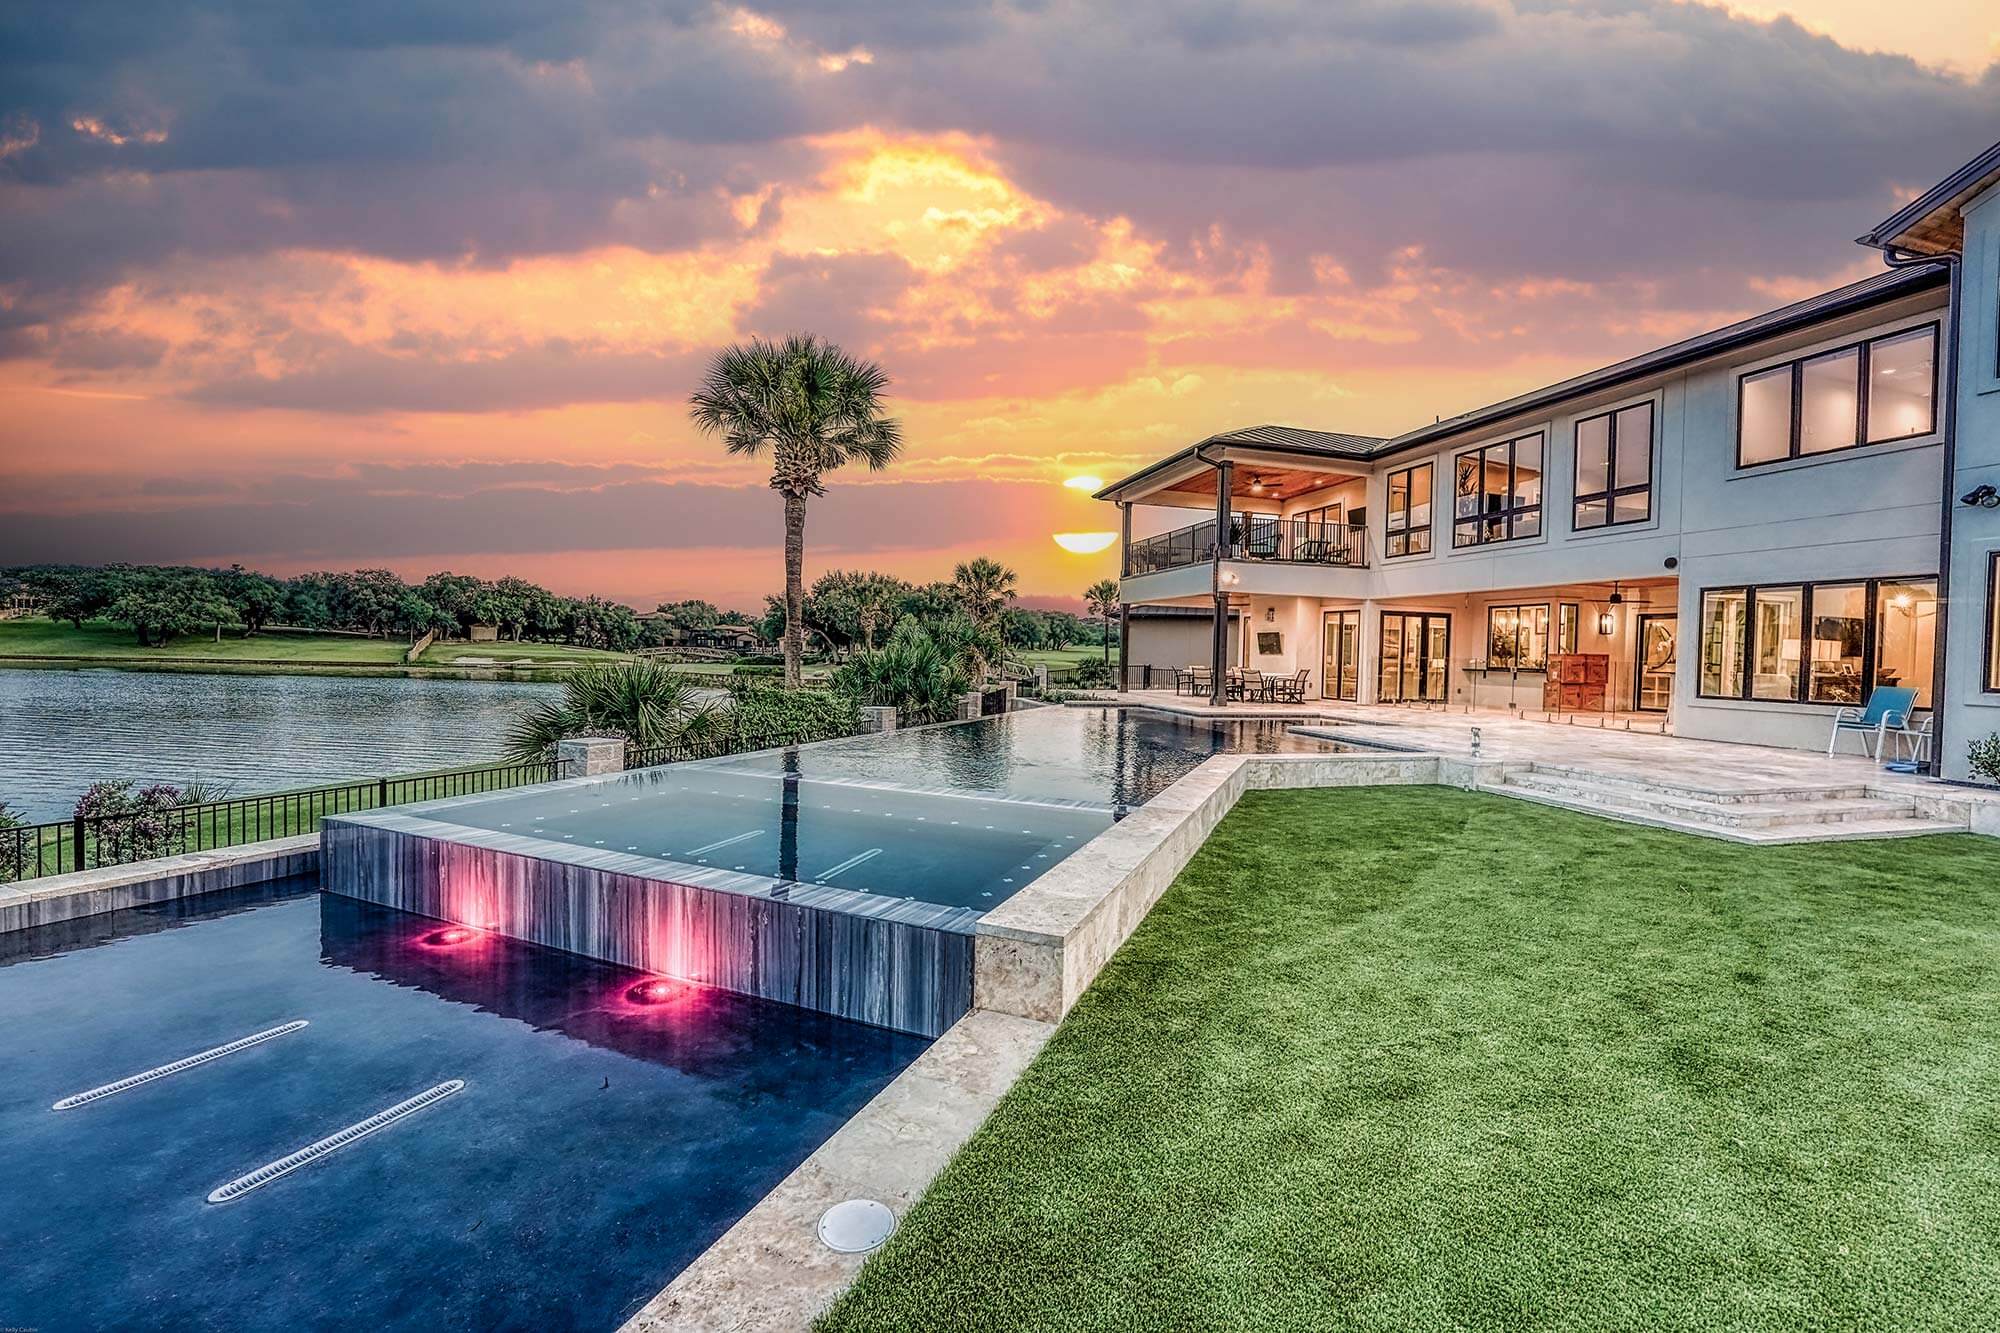 Zbranek and Holt Custom Homes Soft Modern Transitional Outdoor Living Overlooking Lake and Pool